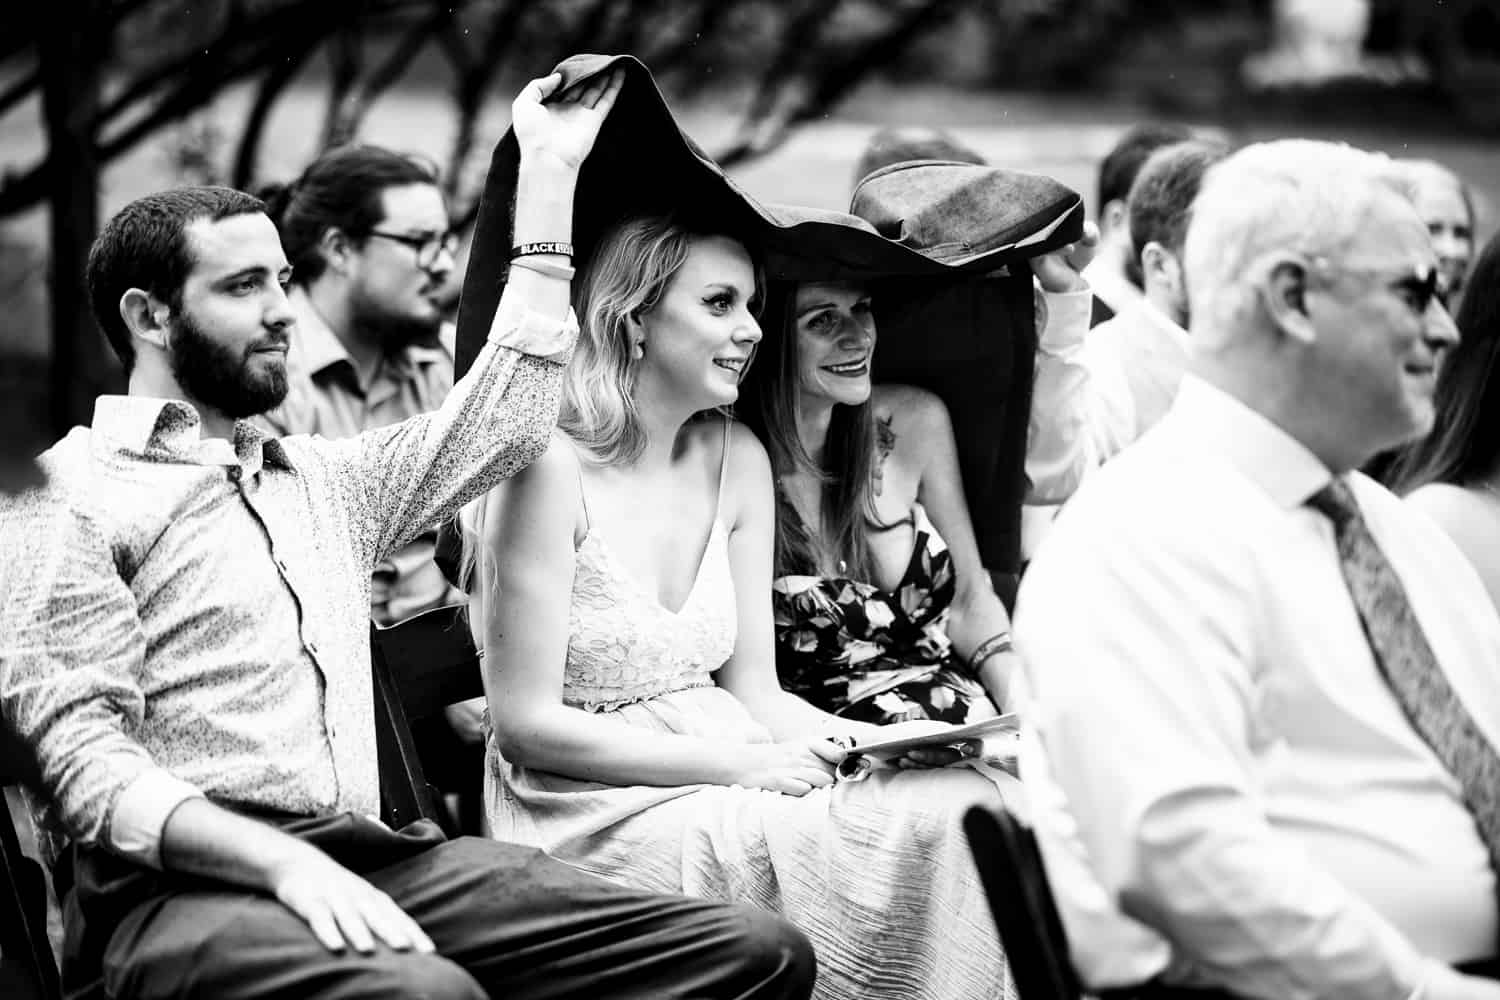 Black and white photo of a wedding ceremony with a woman wearing a hat.